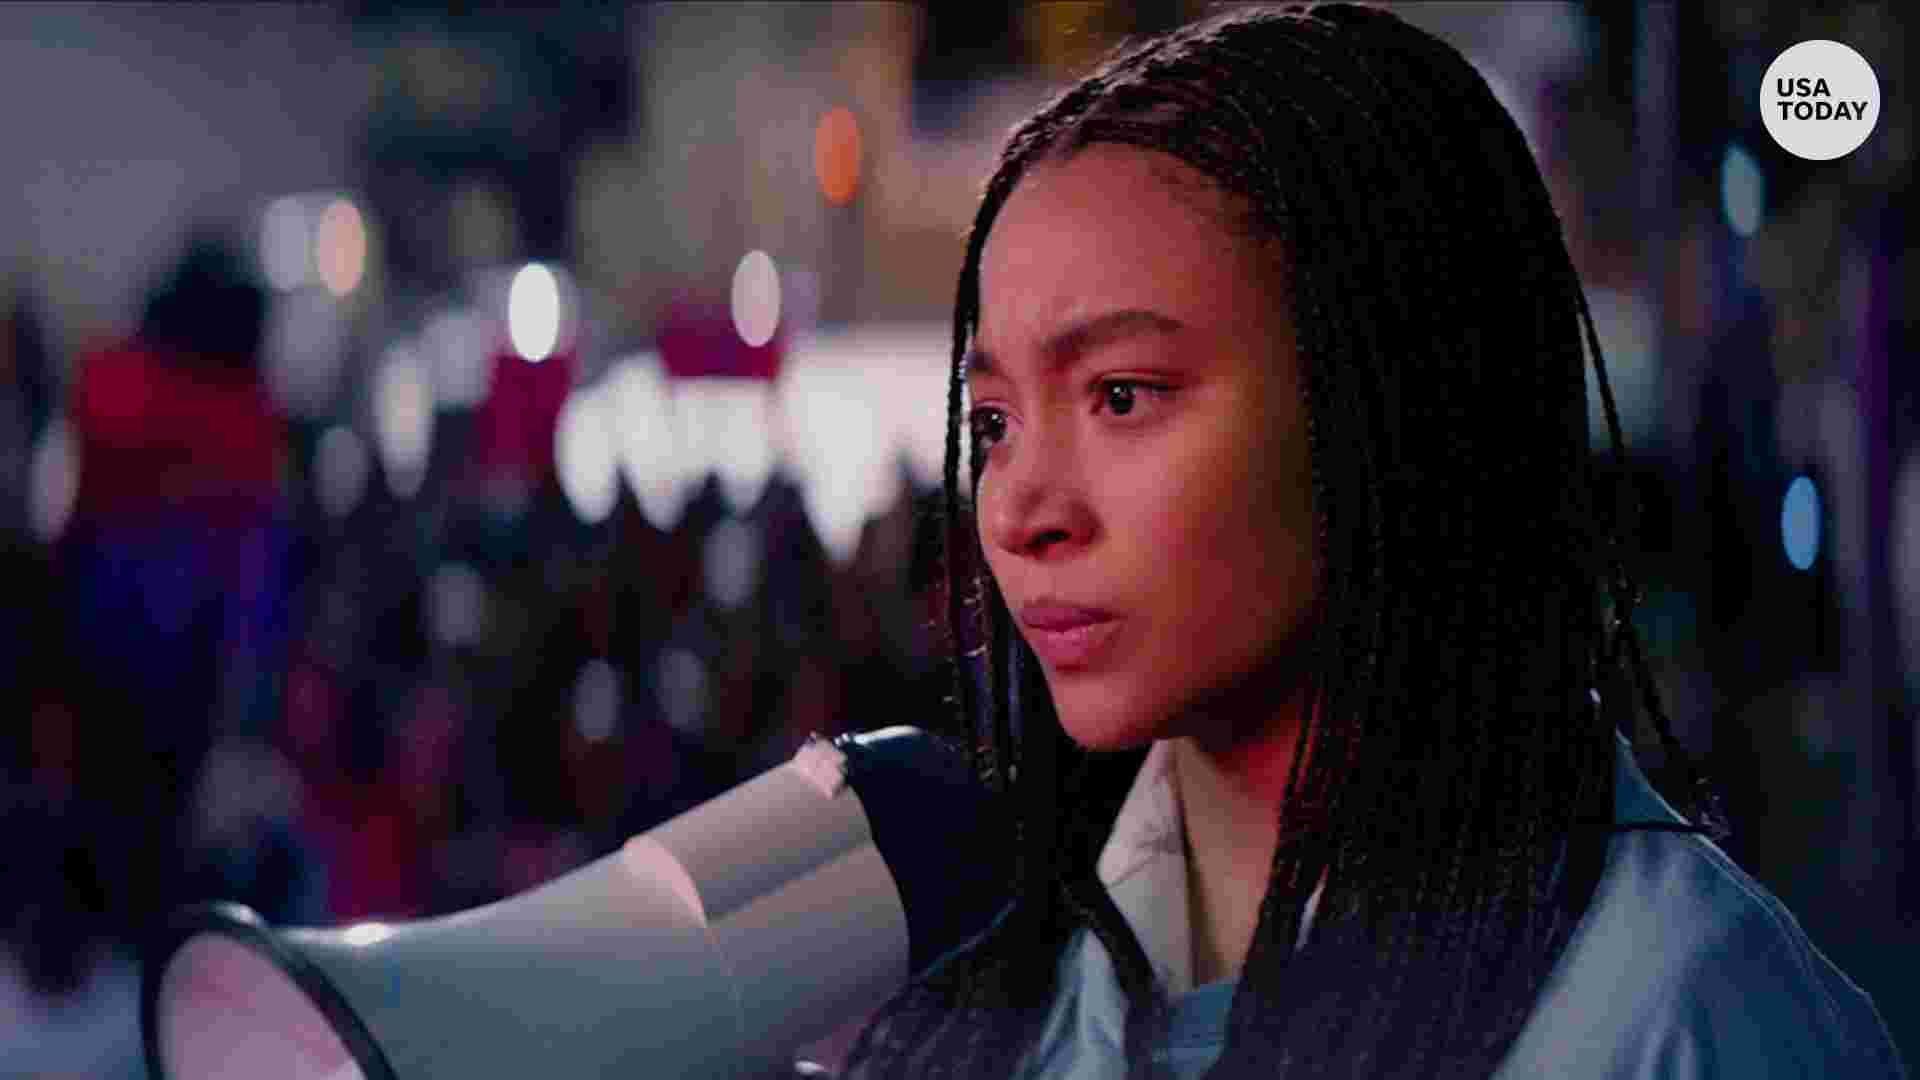 The Hate U Give': Why it's the teen movie we all need to see (review)